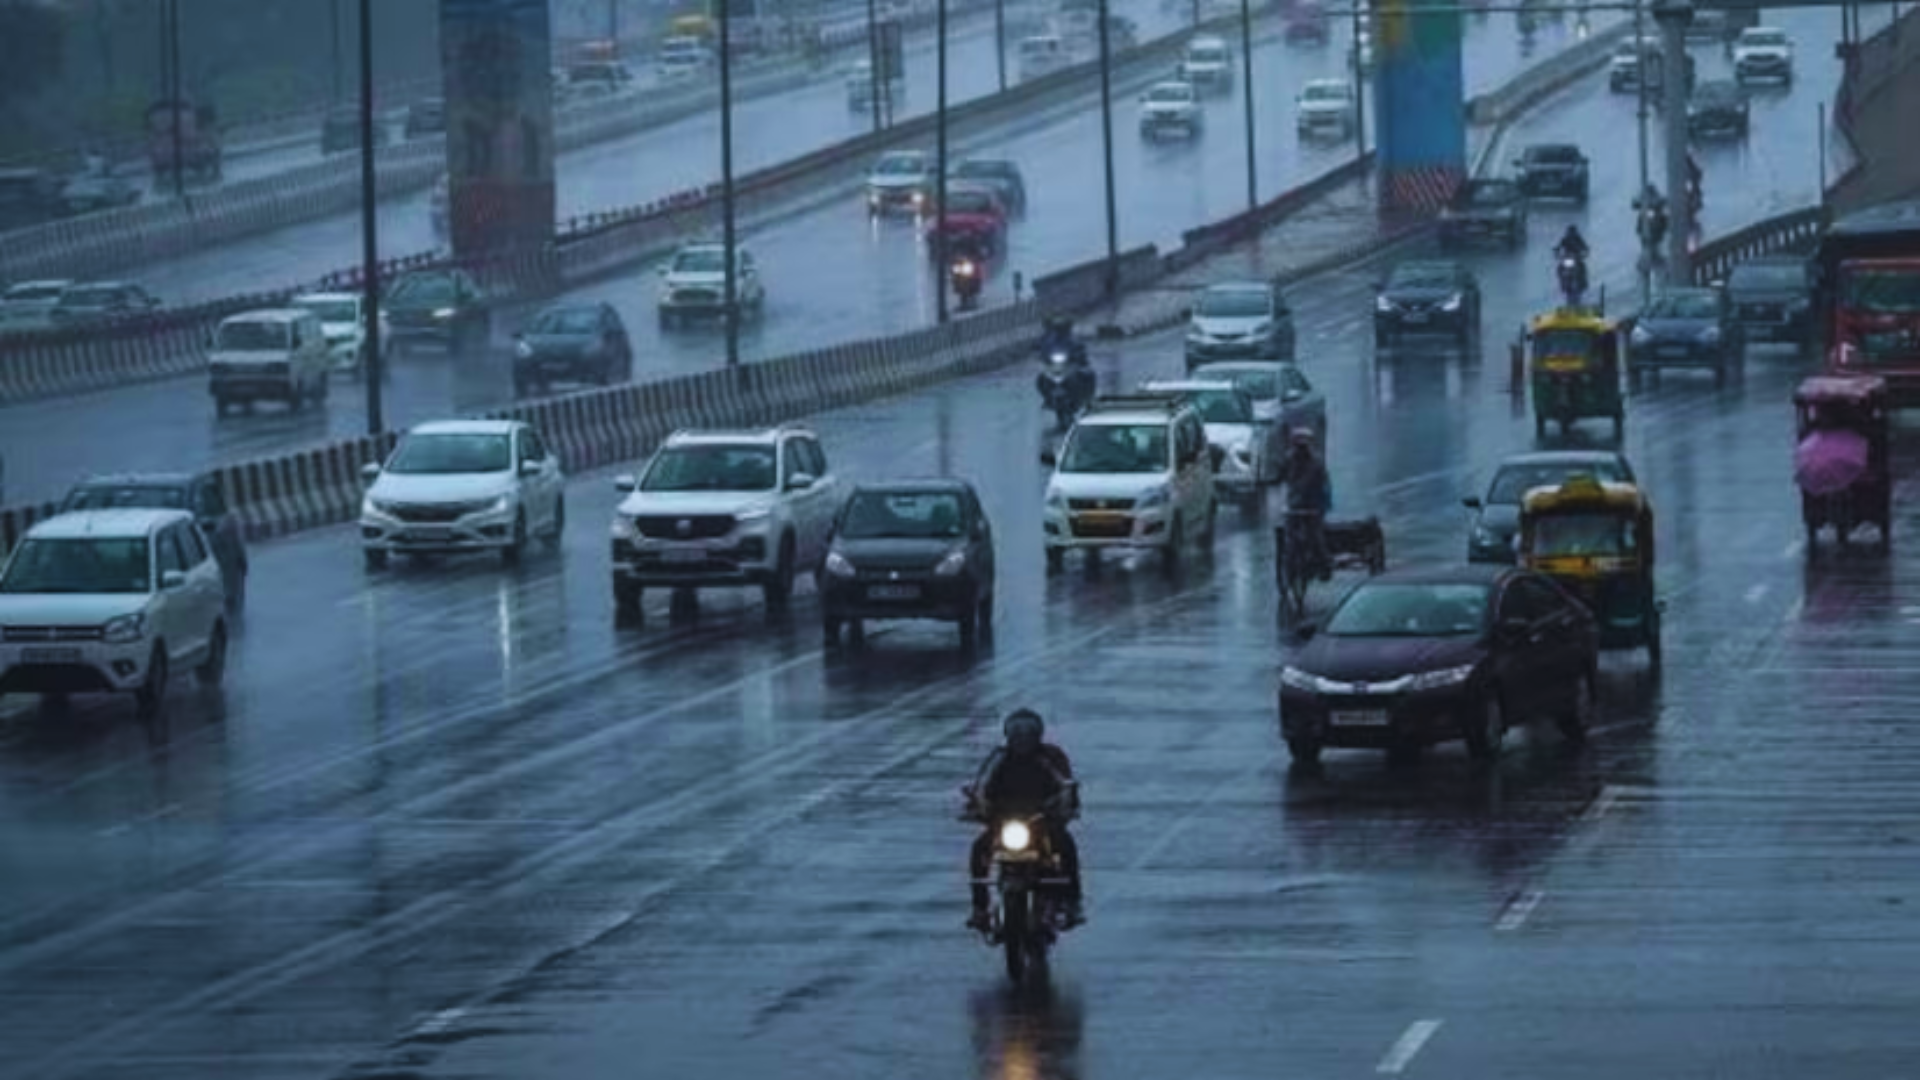 Delhi NCR Takes A Sigh Of Relief From Heatwave, Blessed With Heavy Rain